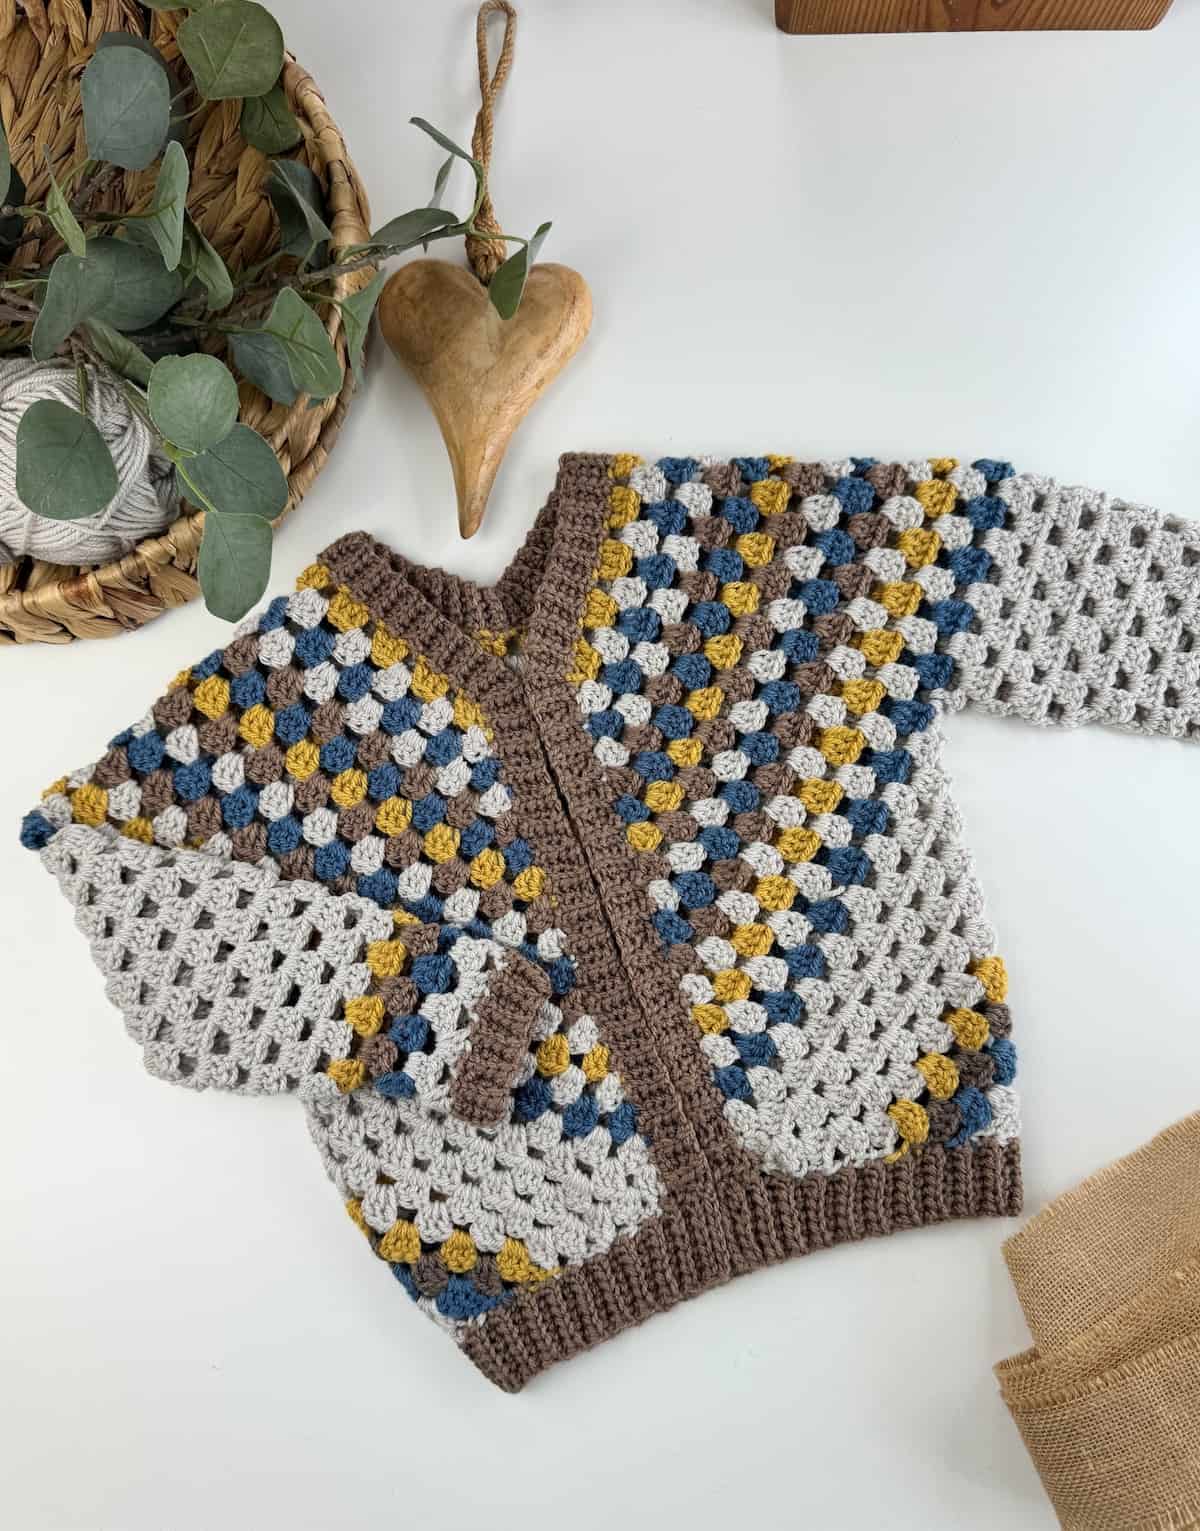 A granny stripe crochet cardigan for boys on a table next to a basket.